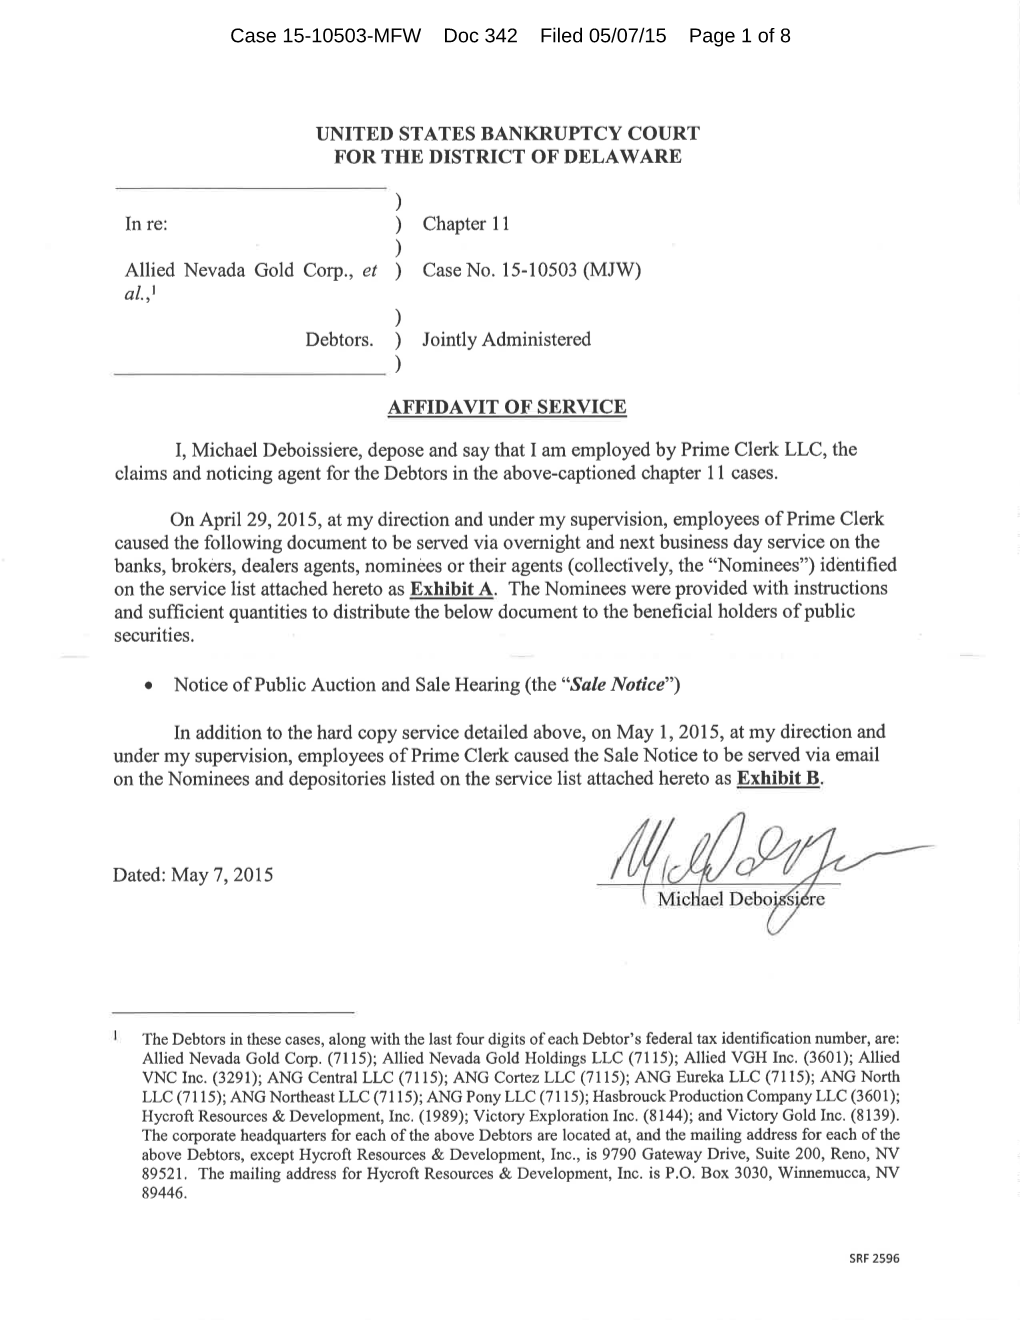 Case 15-10503-MFW Doc 342 Filed 05/07/15 Page 1 of 8 Case 15-10503-MFW Doc 342 Filed 05/07/15 Page 2 of 8 Case 15-10503-MFW Doc 342 Filed 05/07/15 Page 3 of 8